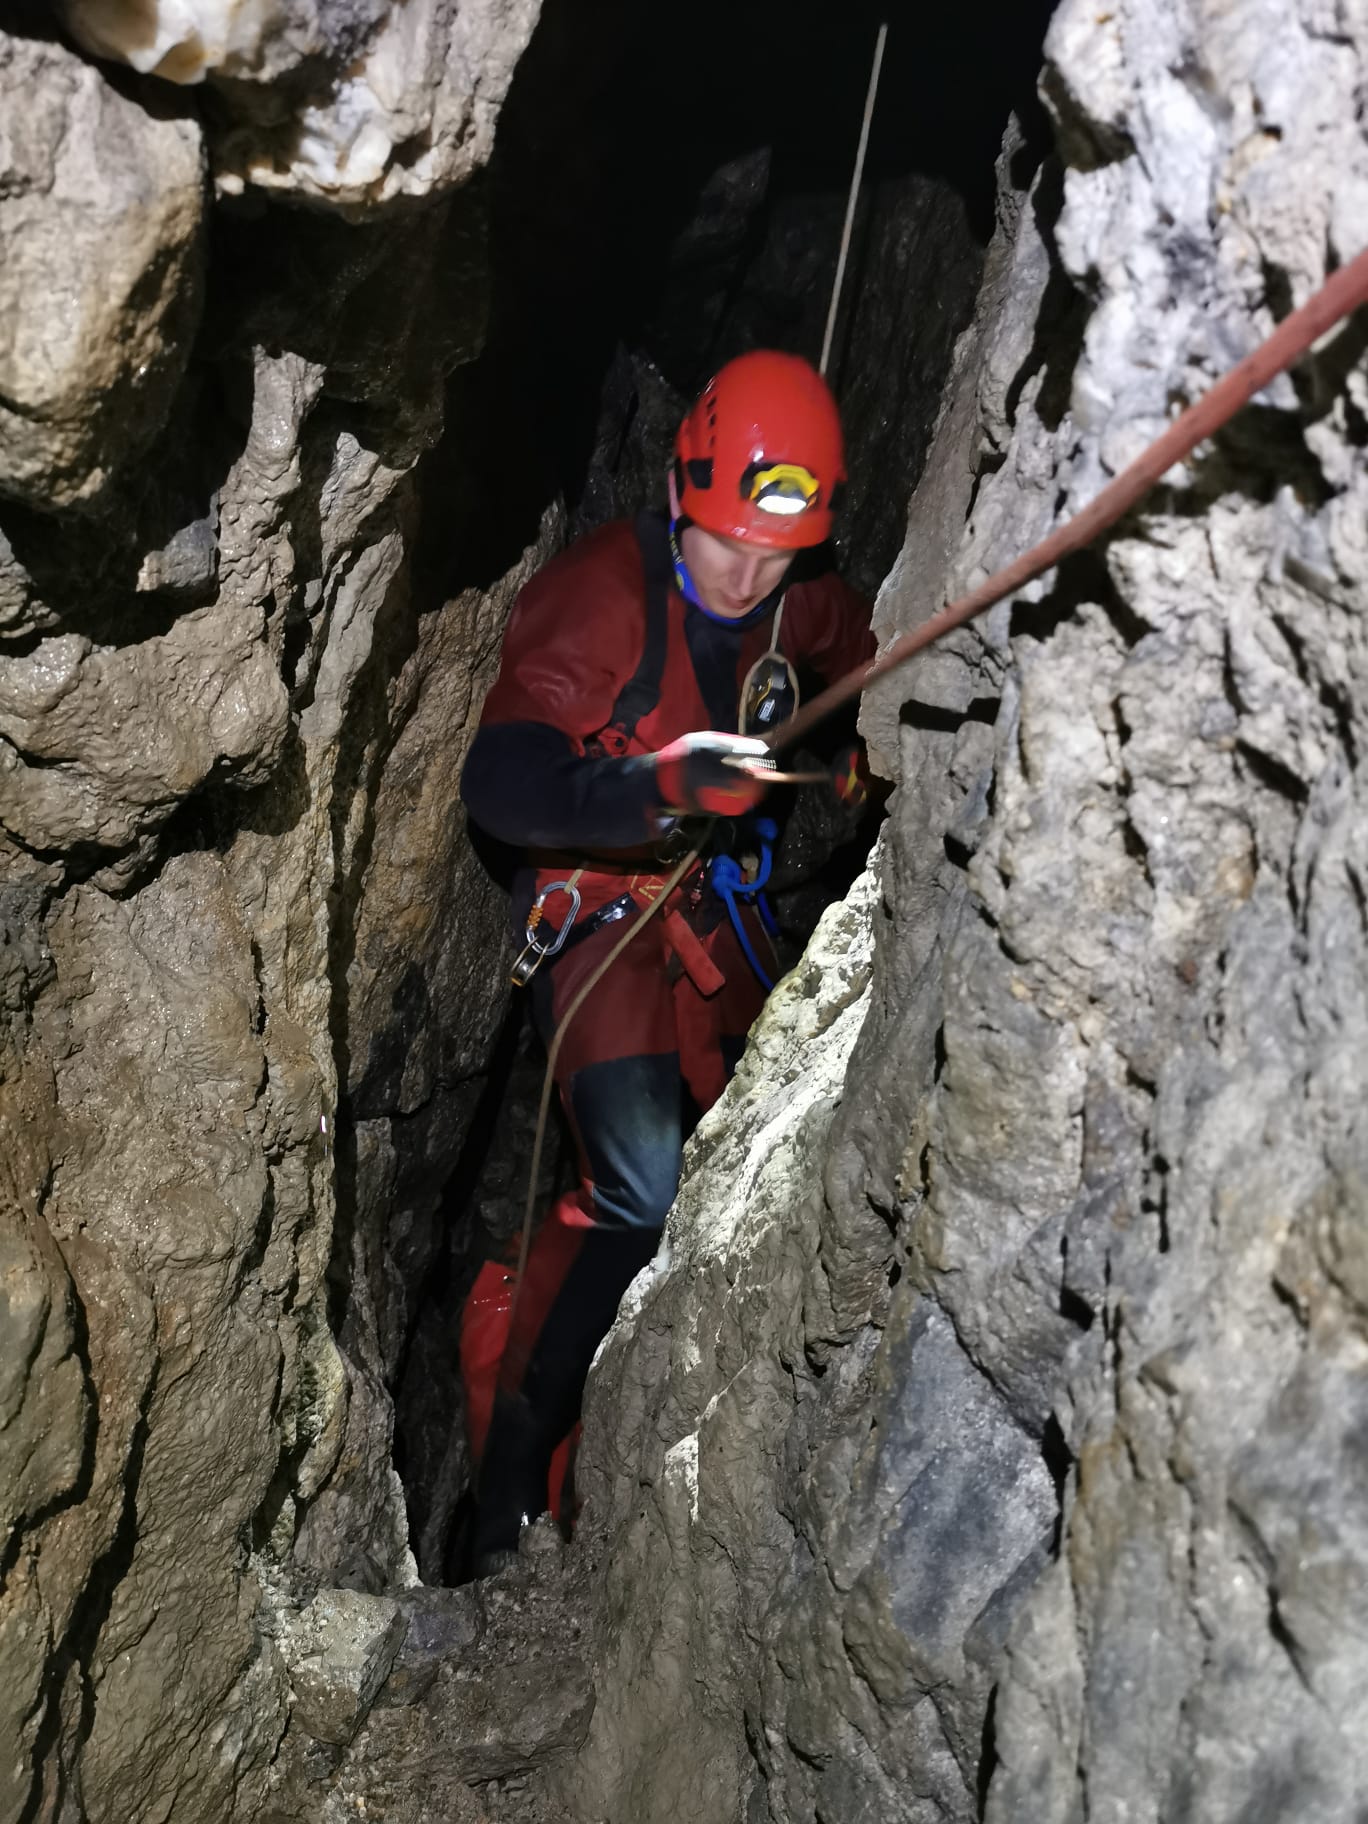 Swinging from the main shaft into the side passage